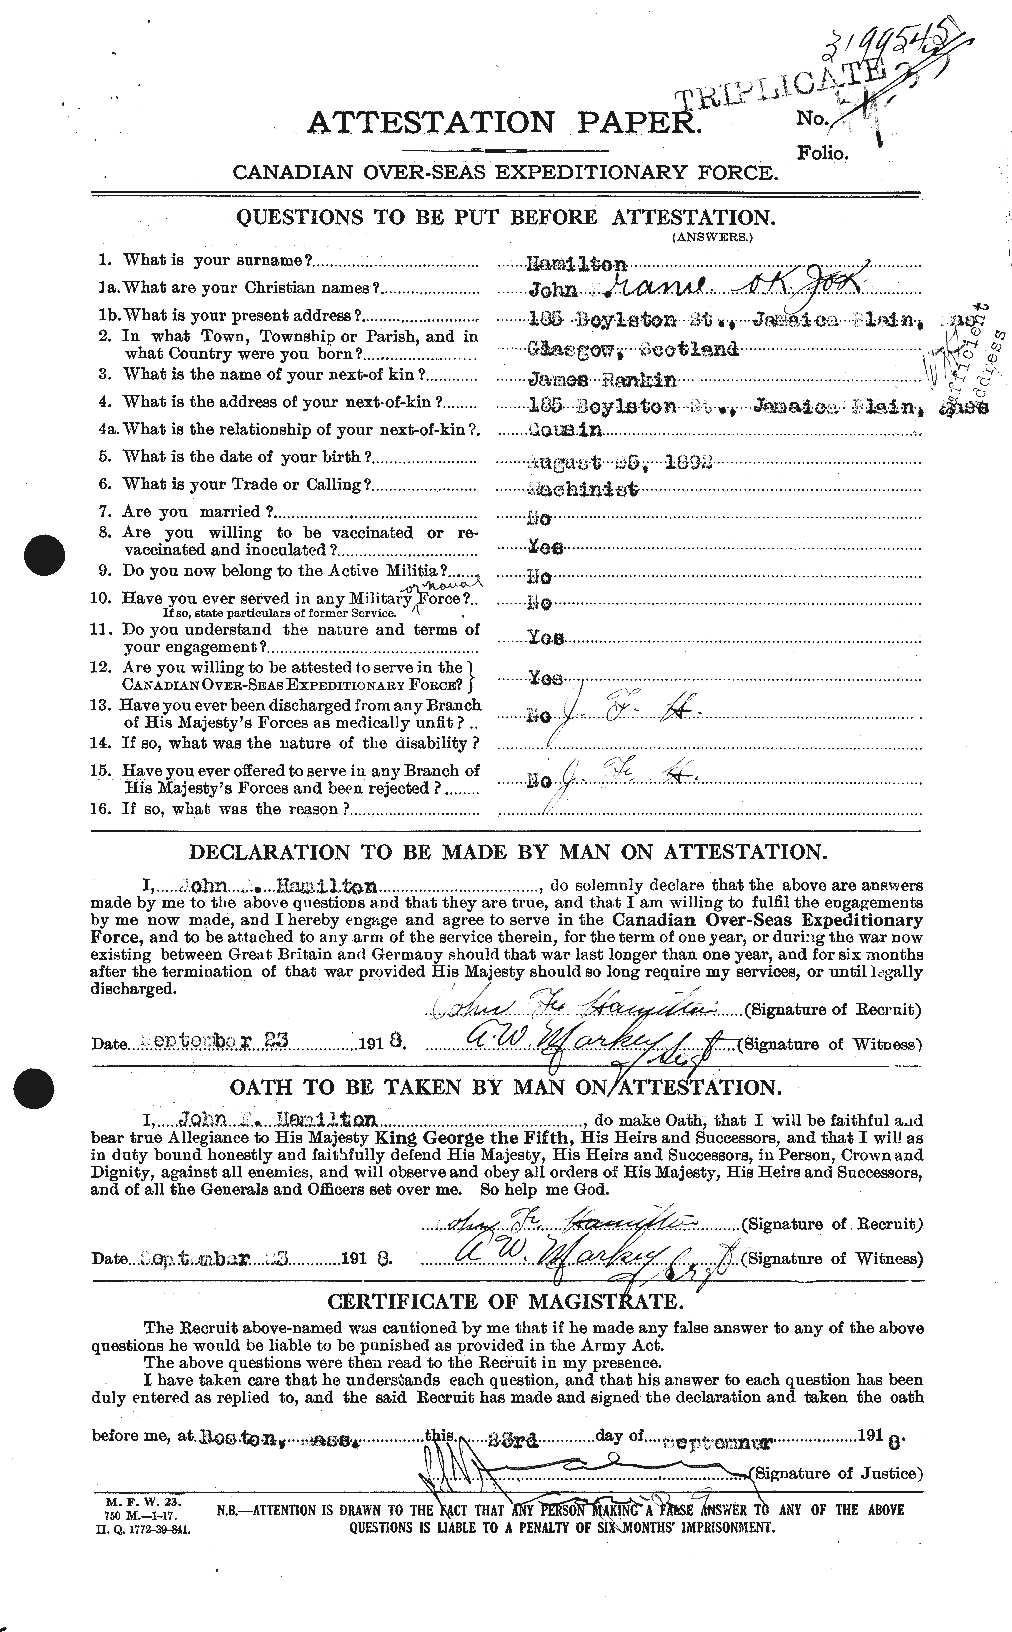 Personnel Records of the First World War - CEF 373083a